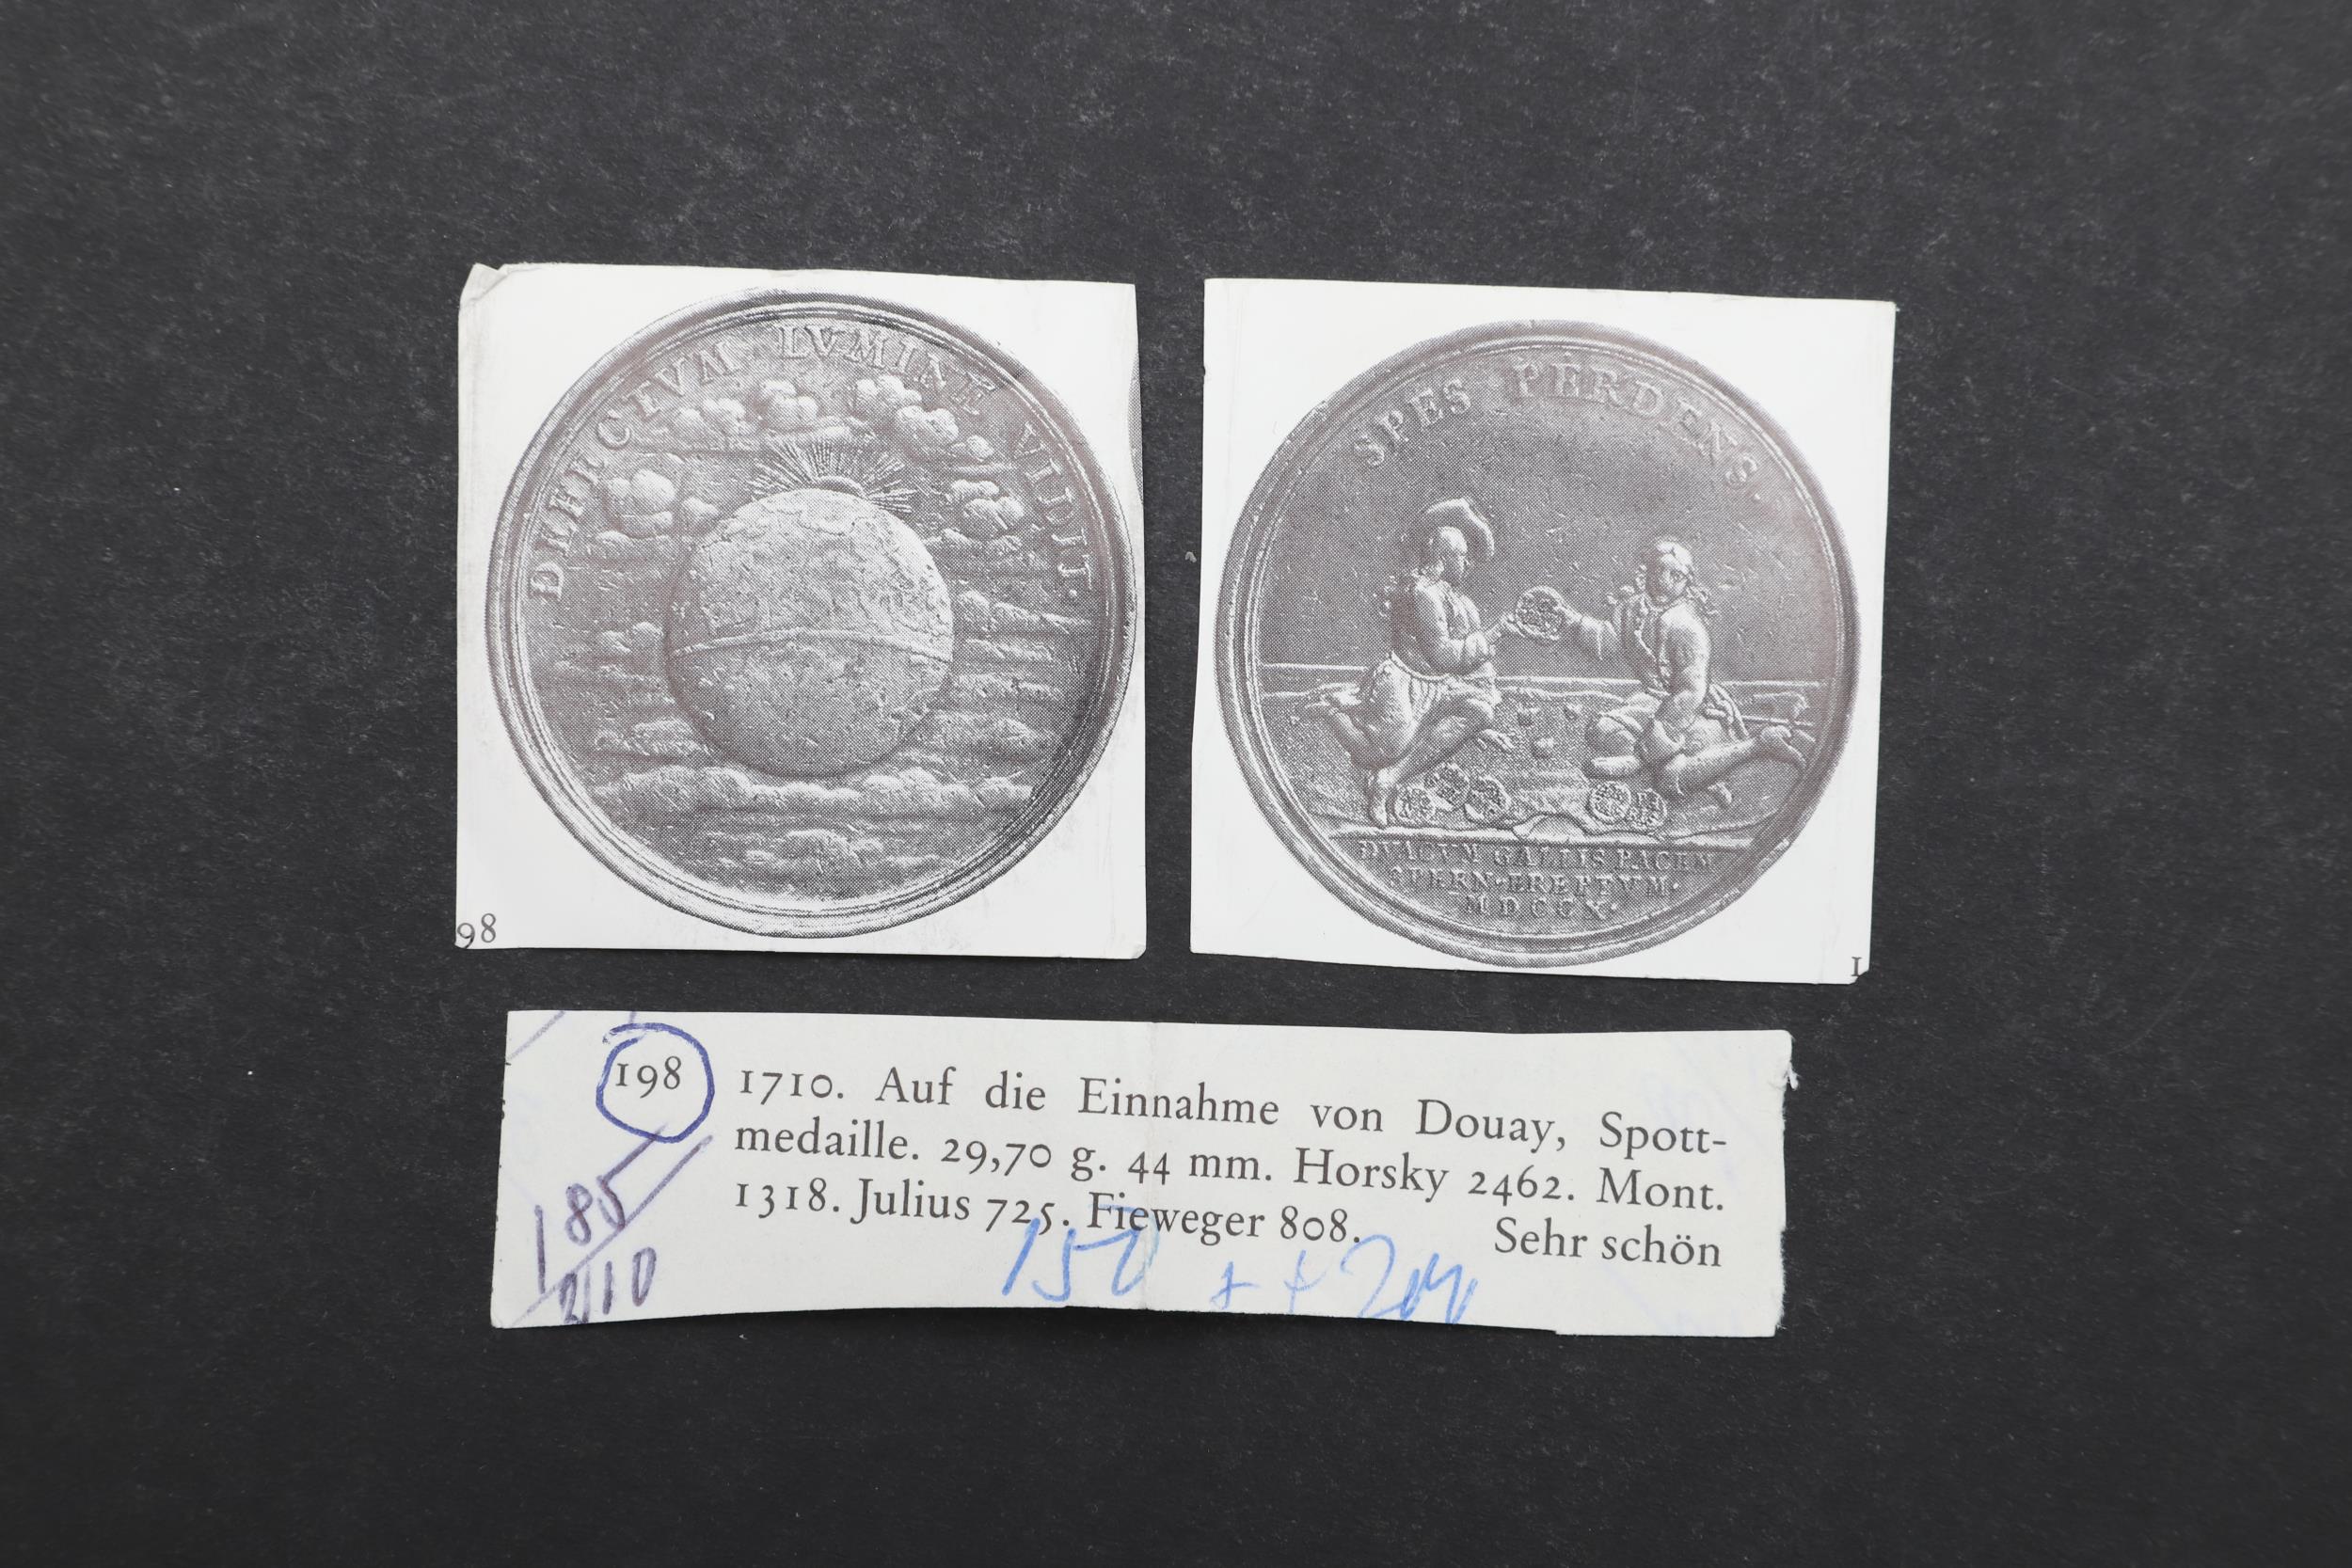 AN EARLY 18TH CENTURY HISTORIC MEDAL CELEBRATING THE CAPTURE OF DOUAY, BY VAN LOON. - Image 4 of 4